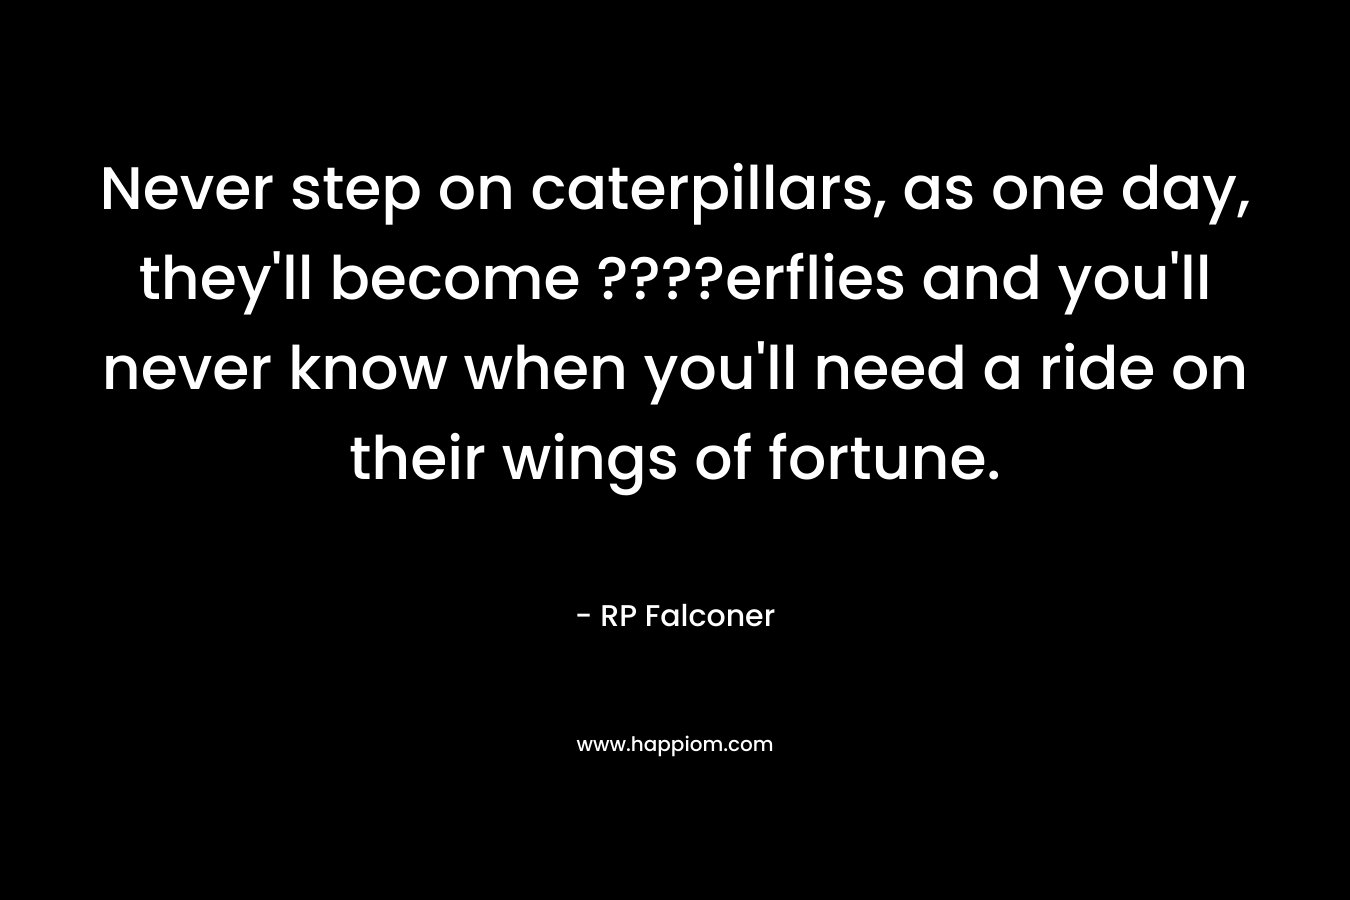 Never step on caterpillars, as one day, they'll become ????erflies and you'll never know when you'll need a ride on their wings of fortune.